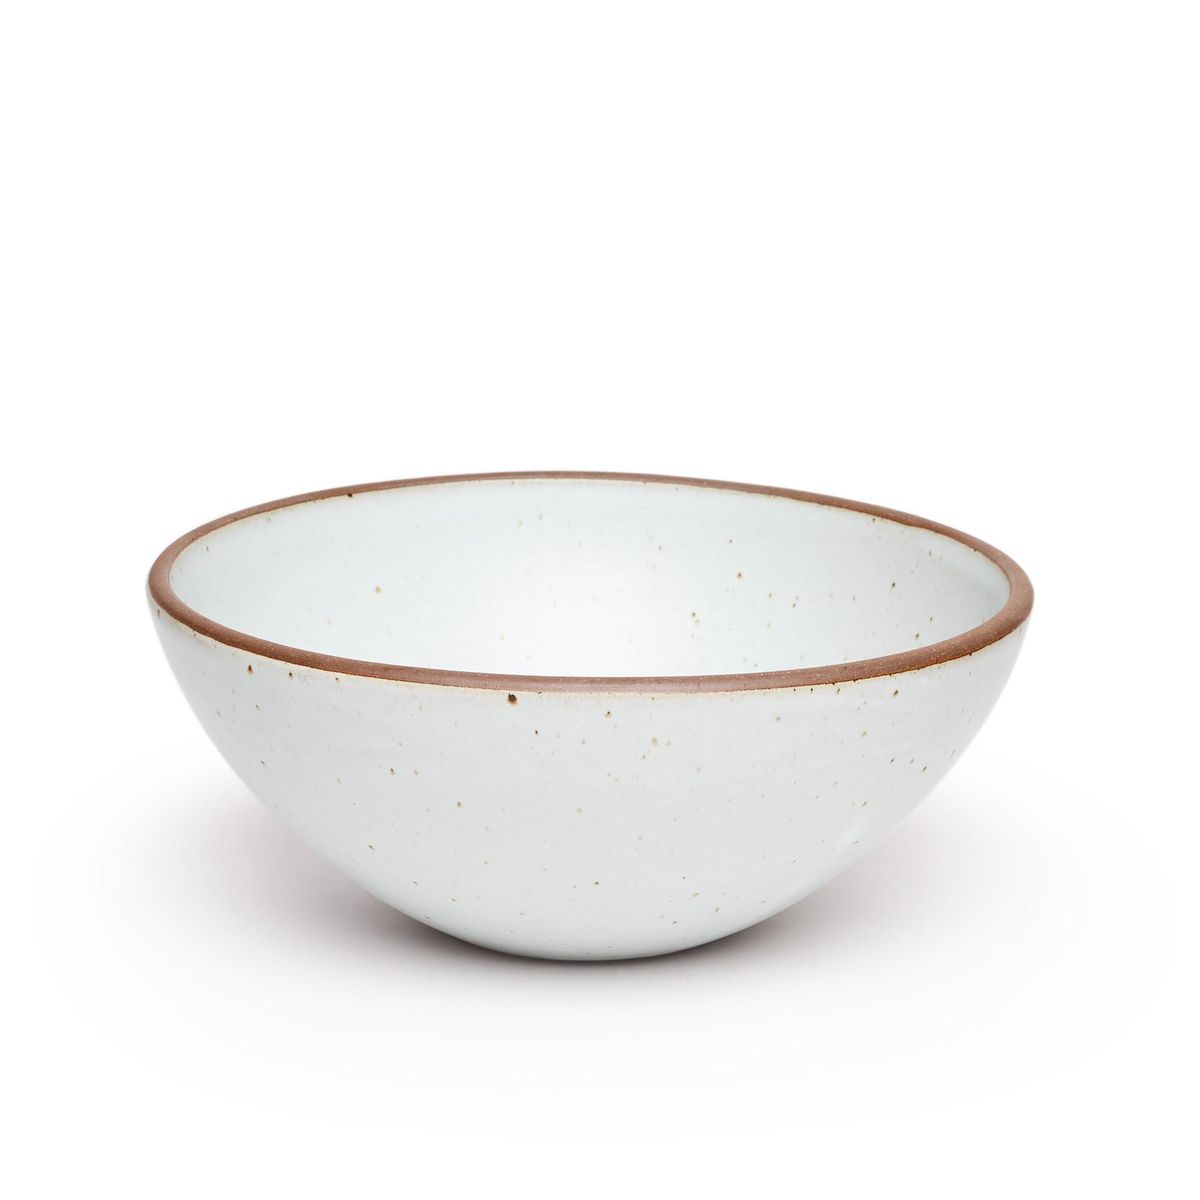 A large ceramic mixing bowl in a cool white color featuring iron speckles and an unglazed rim